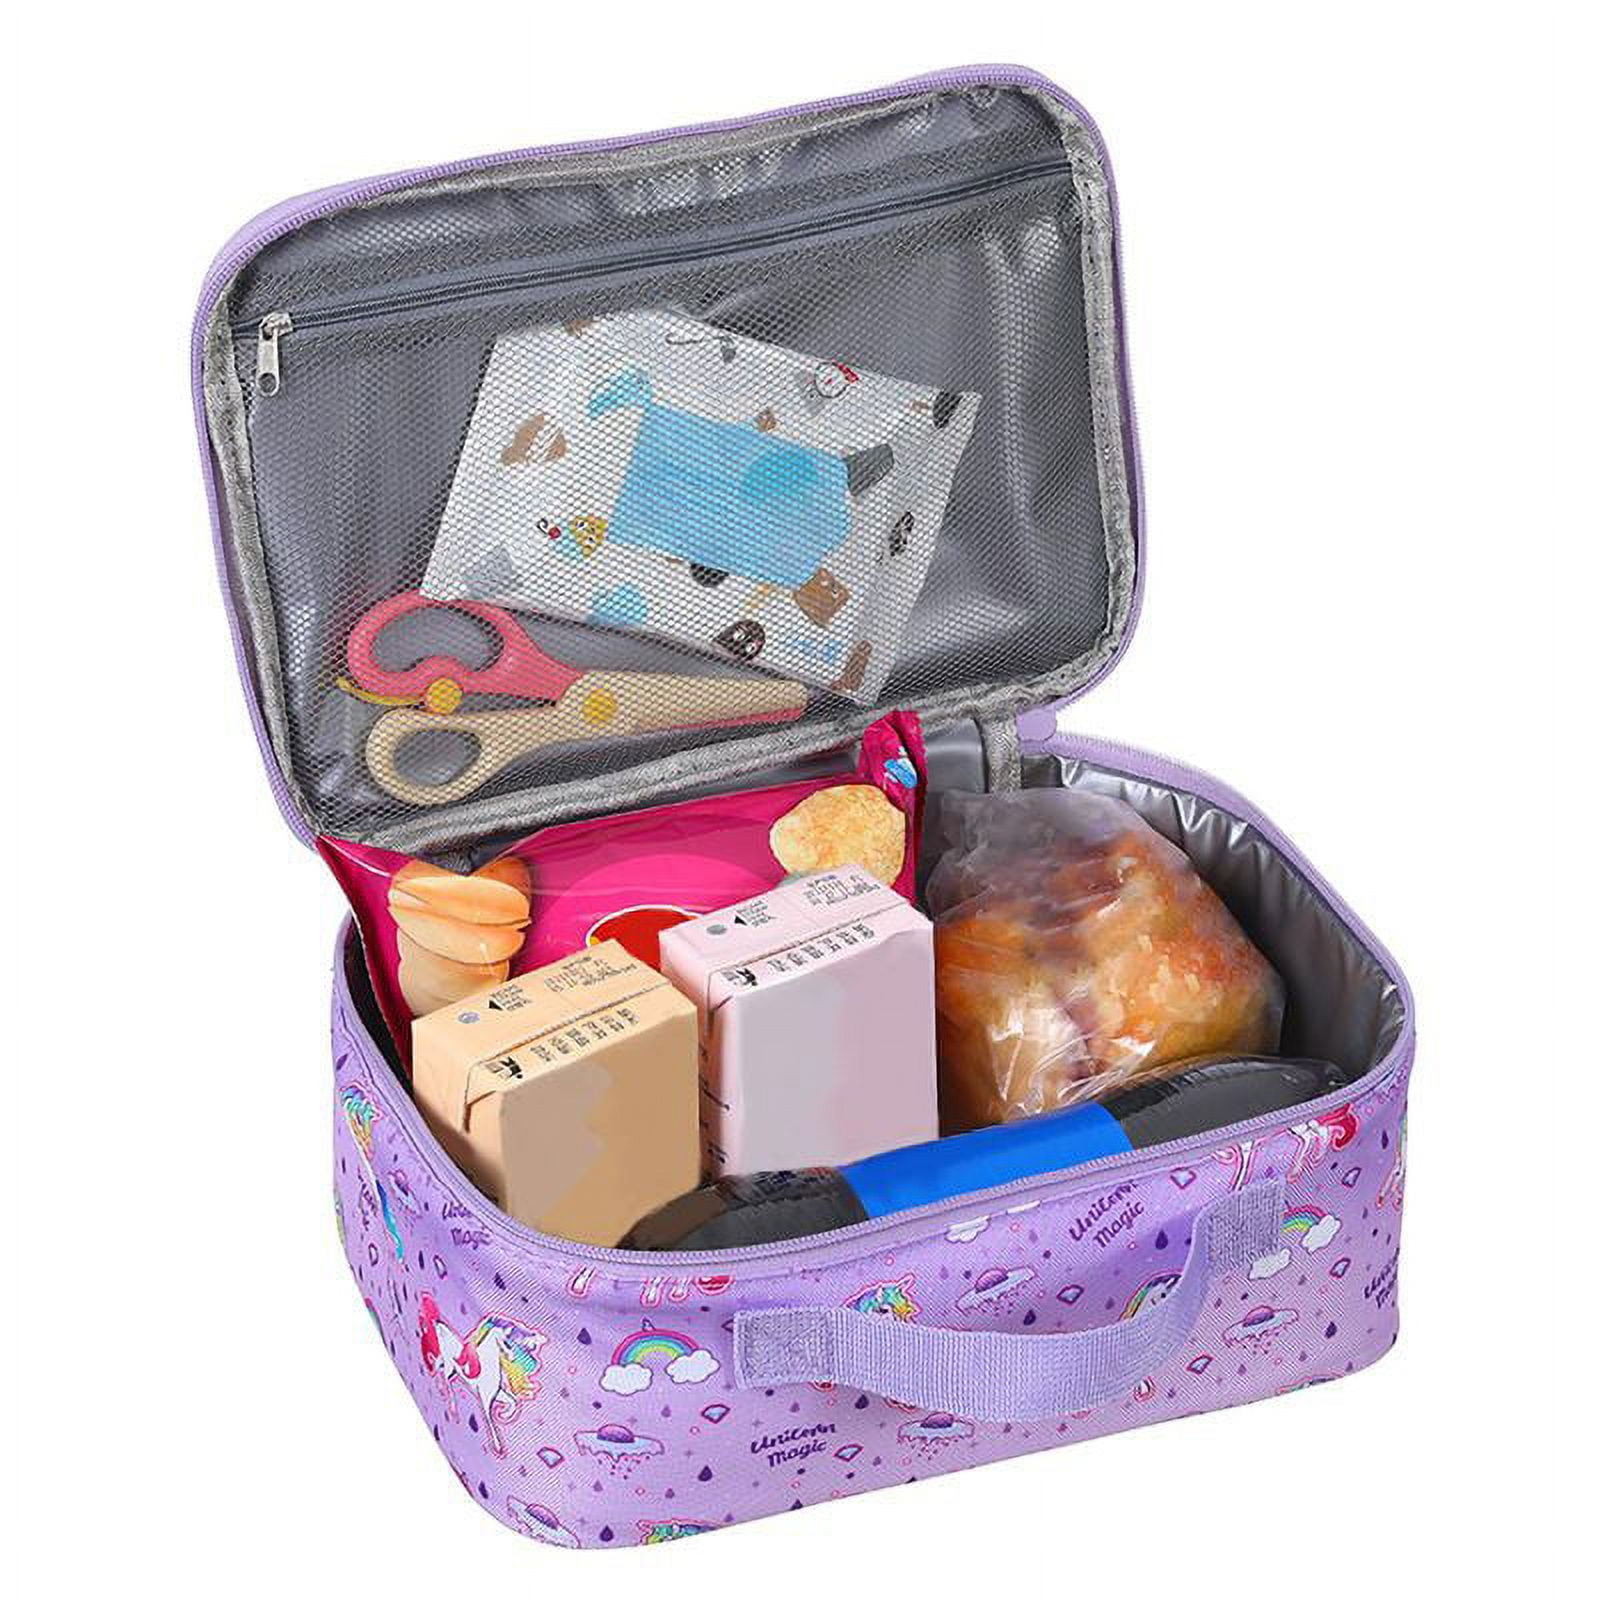 SJENERT Cute Unicorn Lunch Box, Lunch Tote Bag Lunch Box Container Bento  Boxes for Children Girls and Boys, School Picnic Travel Outdoors 